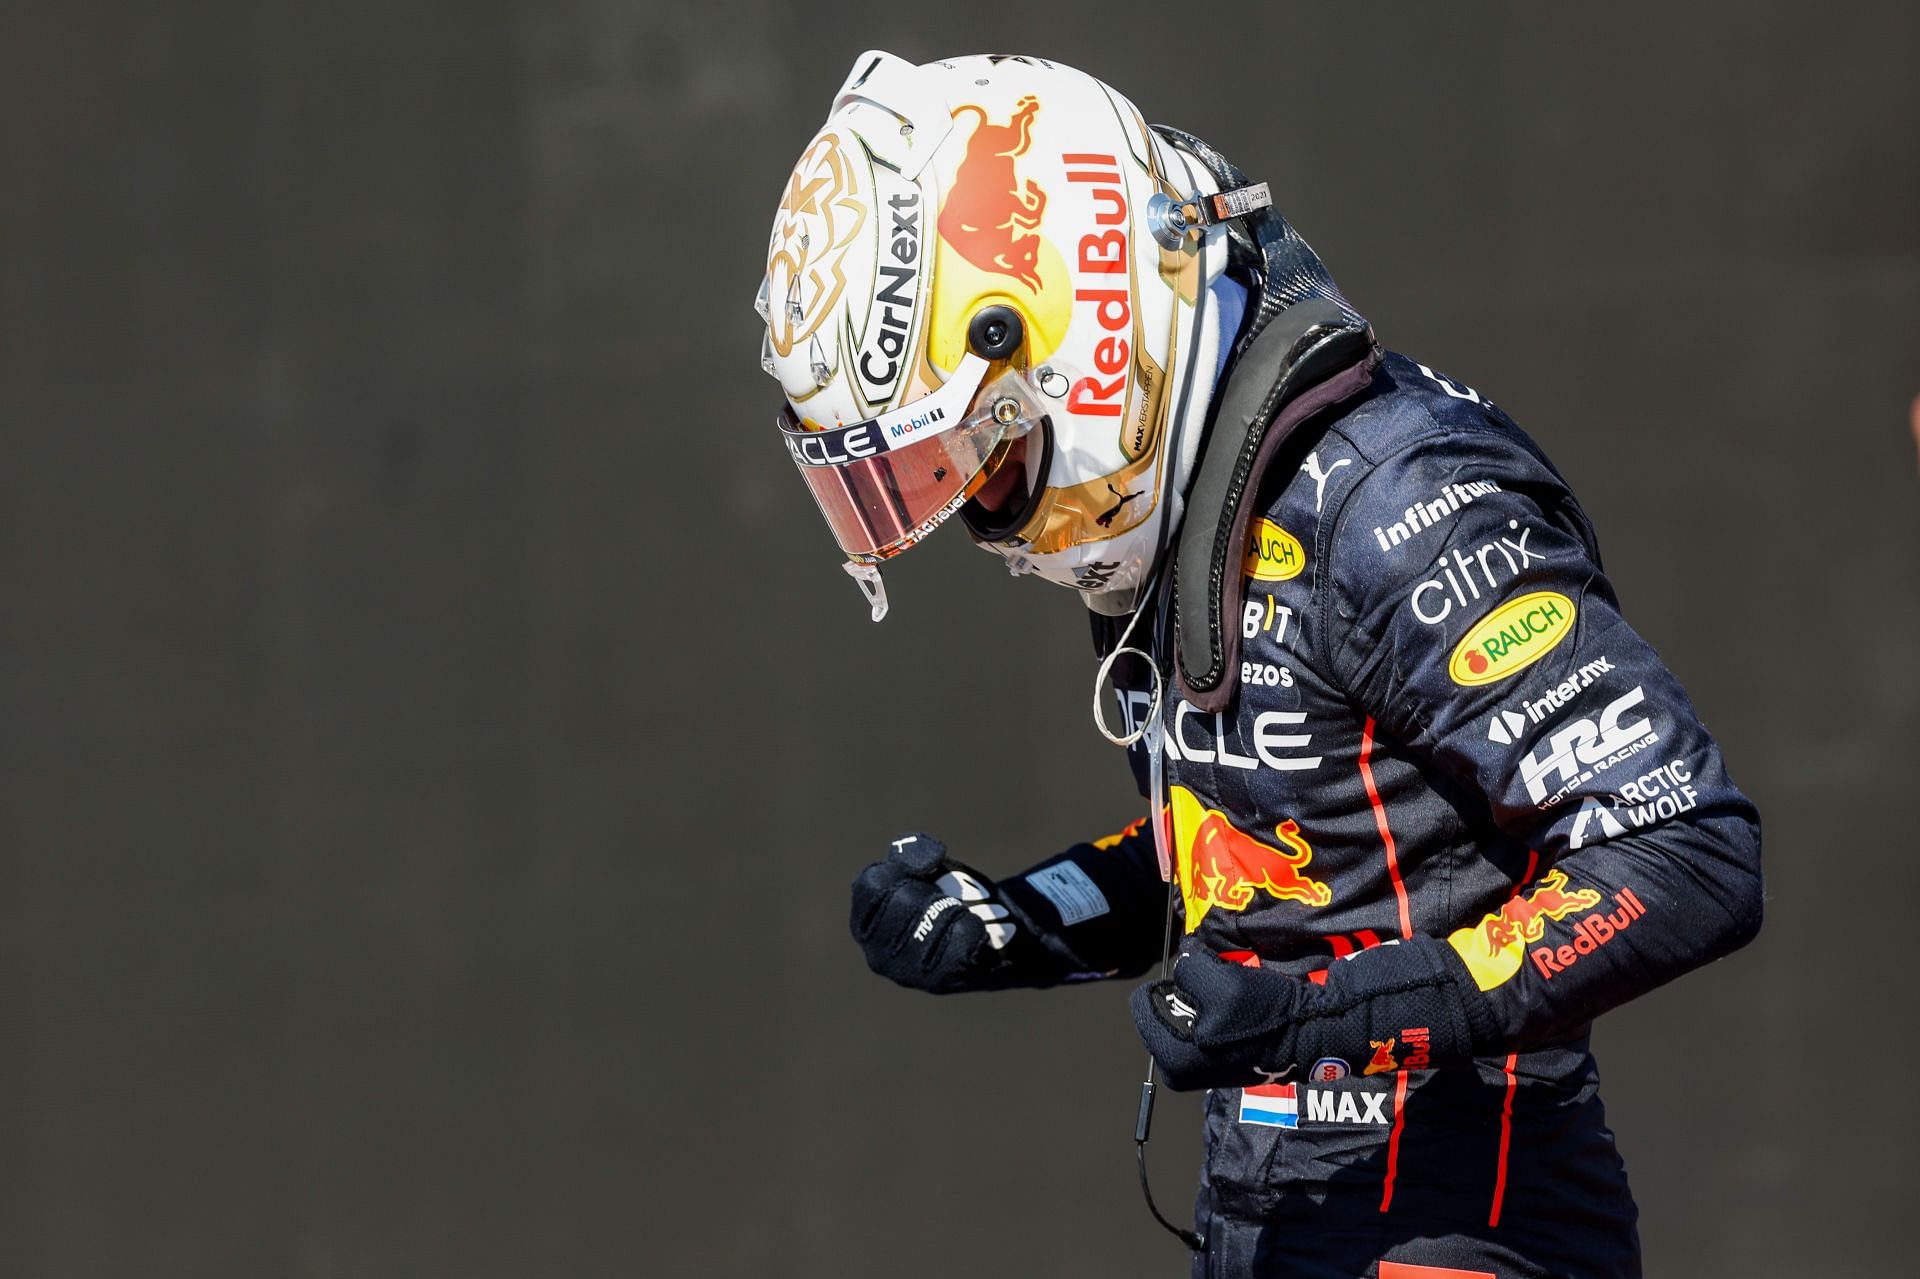 Max Verstappen took his seventh victory of the season at the 2022 F1 French GP to further increase his championship lead